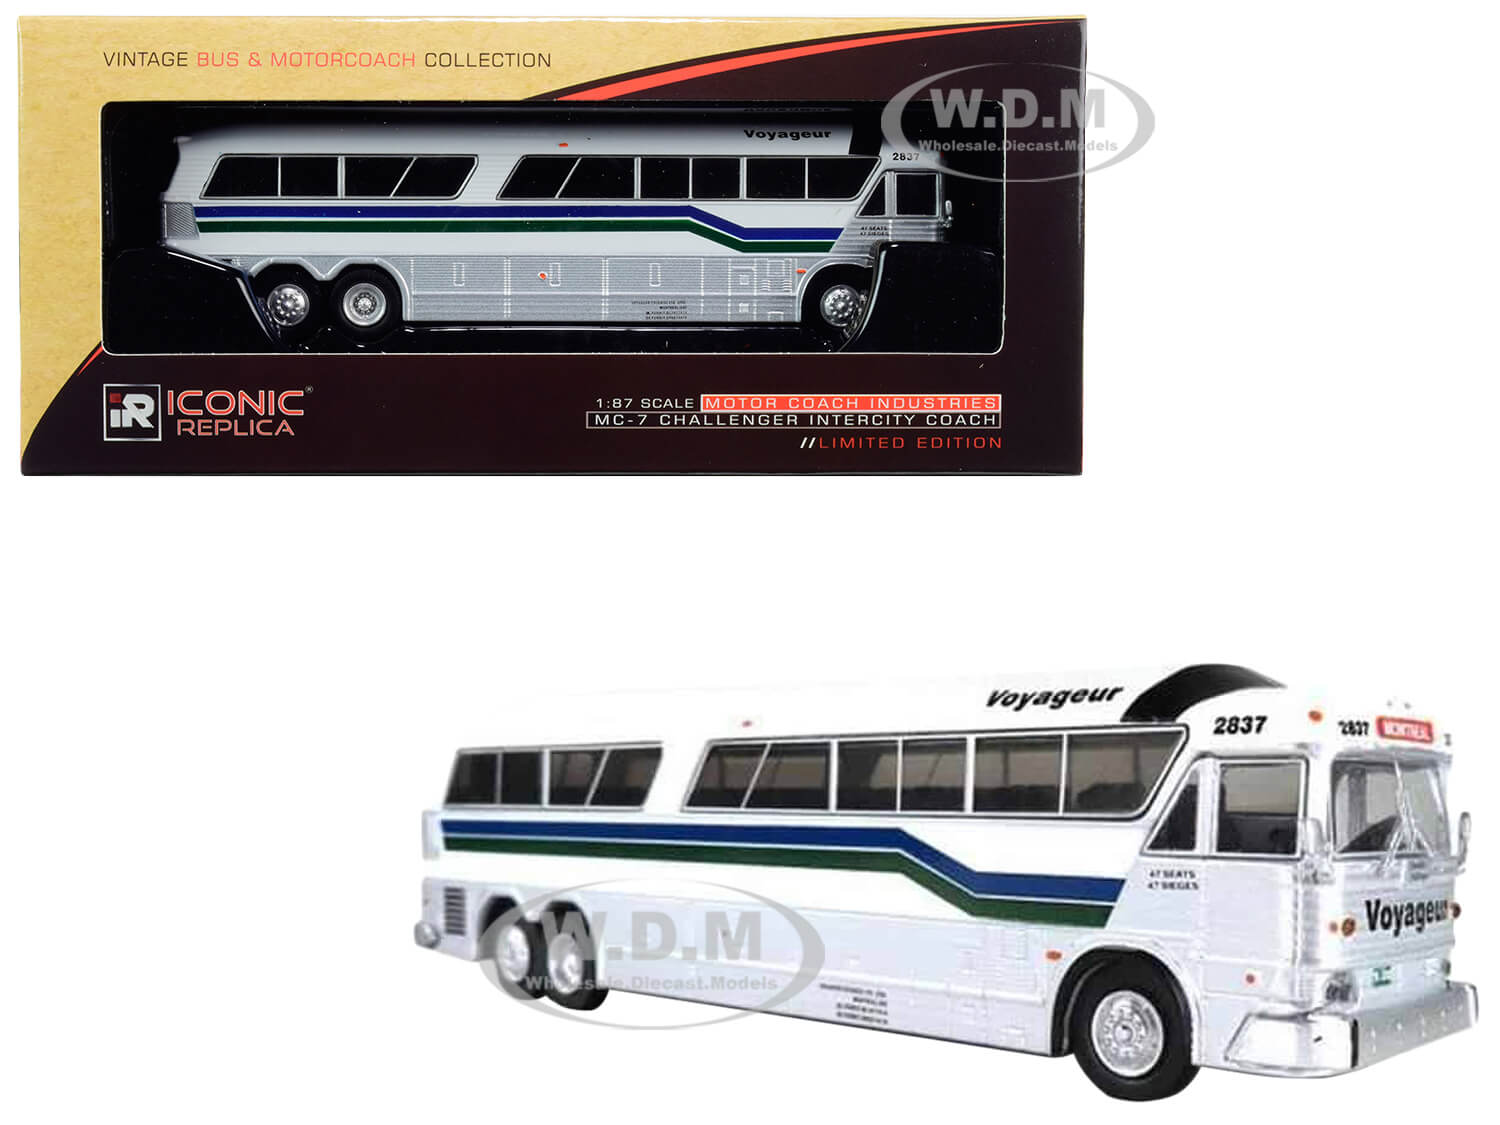 1970 MCI MC-7 Challenger Intercity Motorcoach "Voyageur" "Destination Montreal" (Canada) White and Silver with Stripes "Vintage Bus &amp; Motorcoach